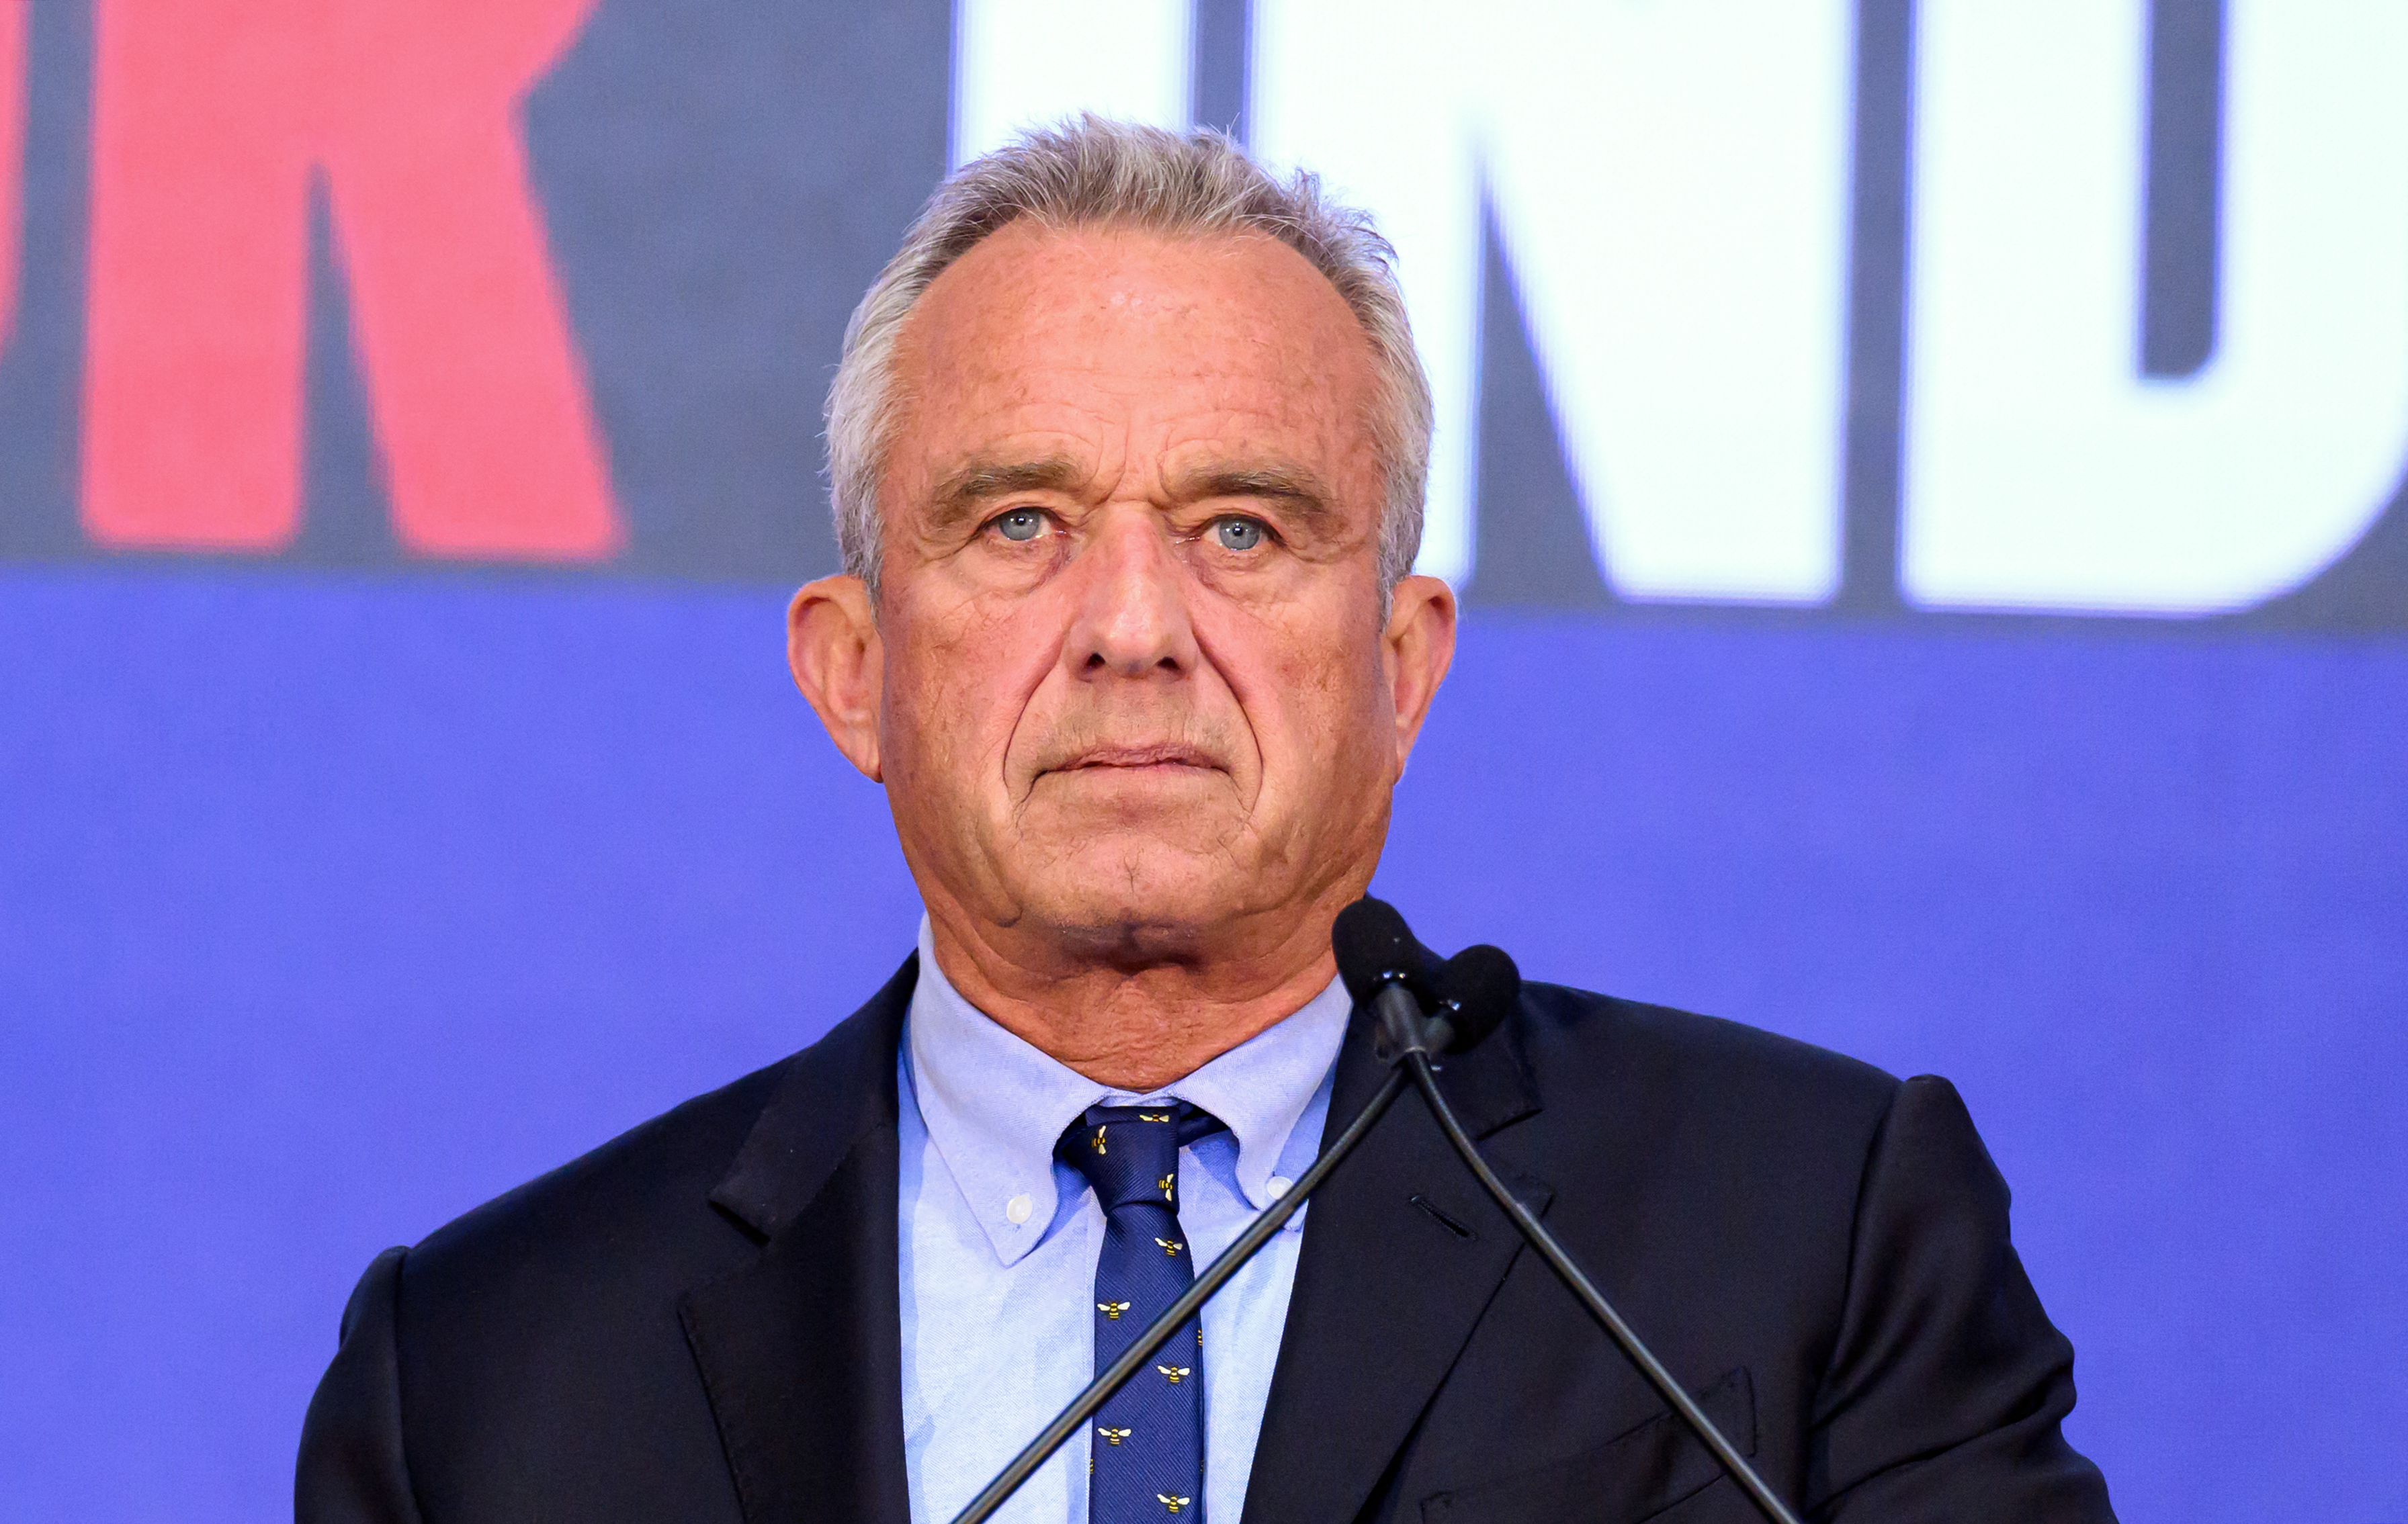 Independent presidential candidate Robert F. Kennedy Jr. speaks during a campaign event in Oakland, California, on March 26.